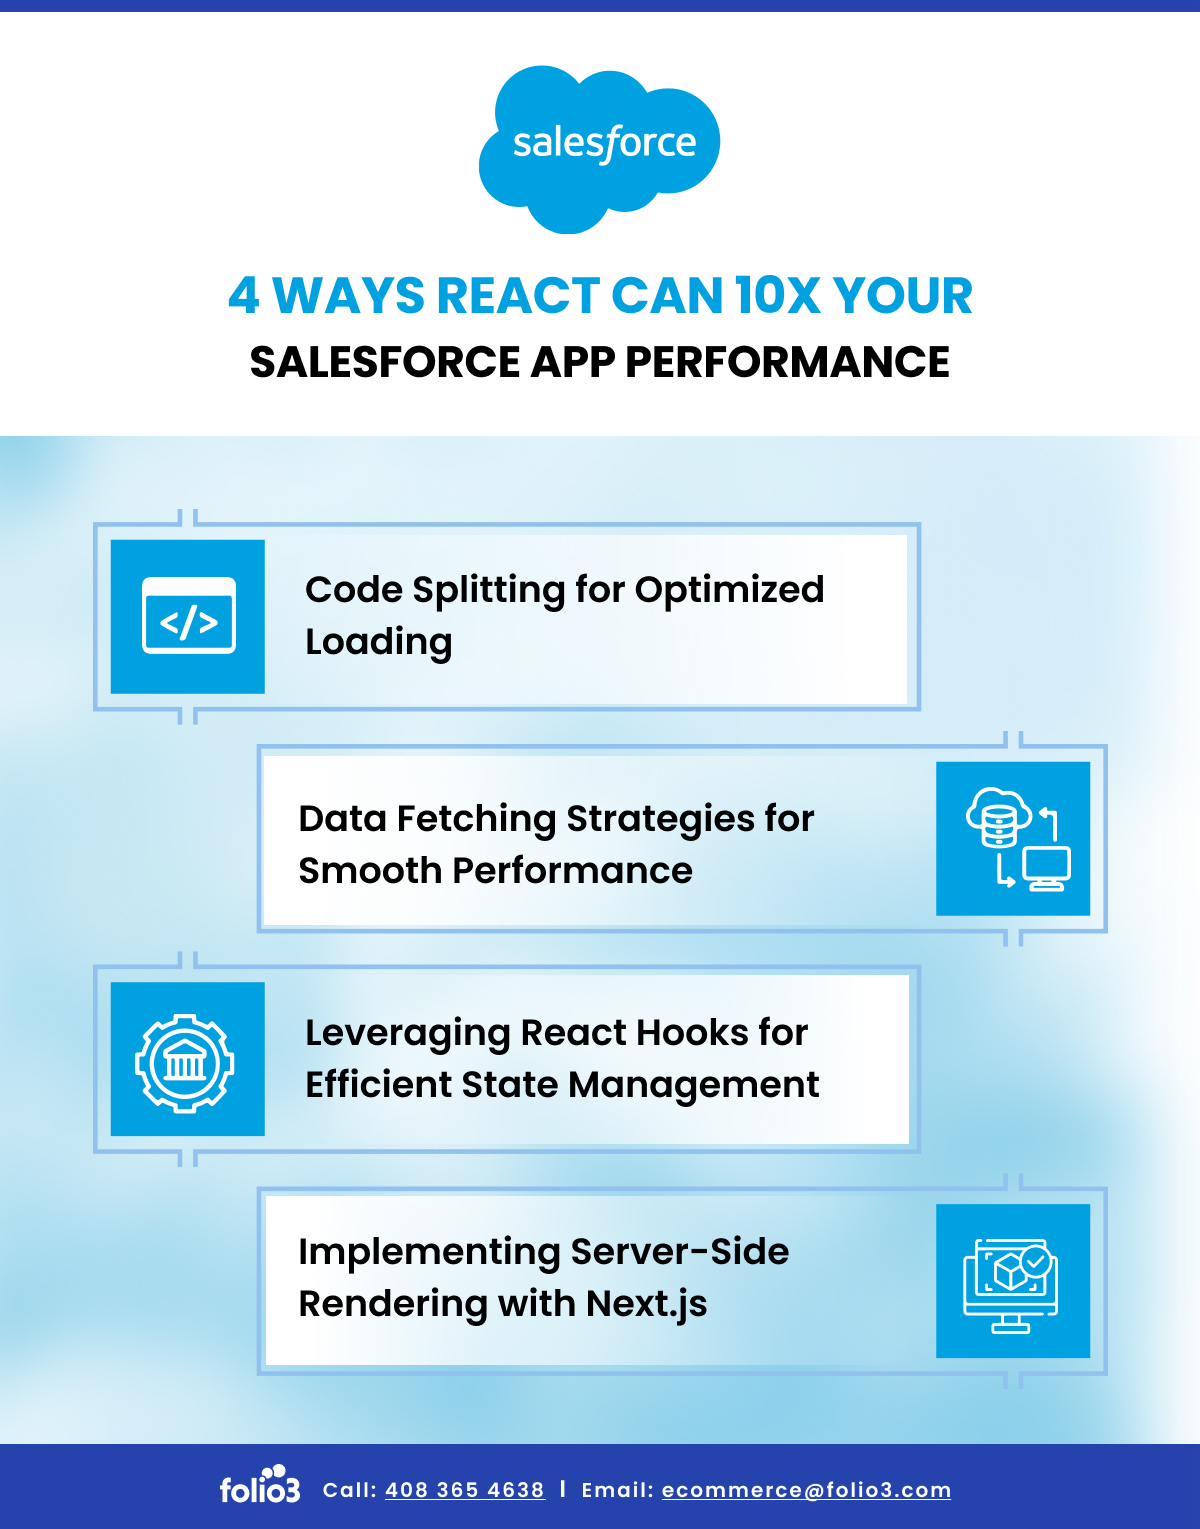 4 Ways to 10x Your React Salesforce App Performance